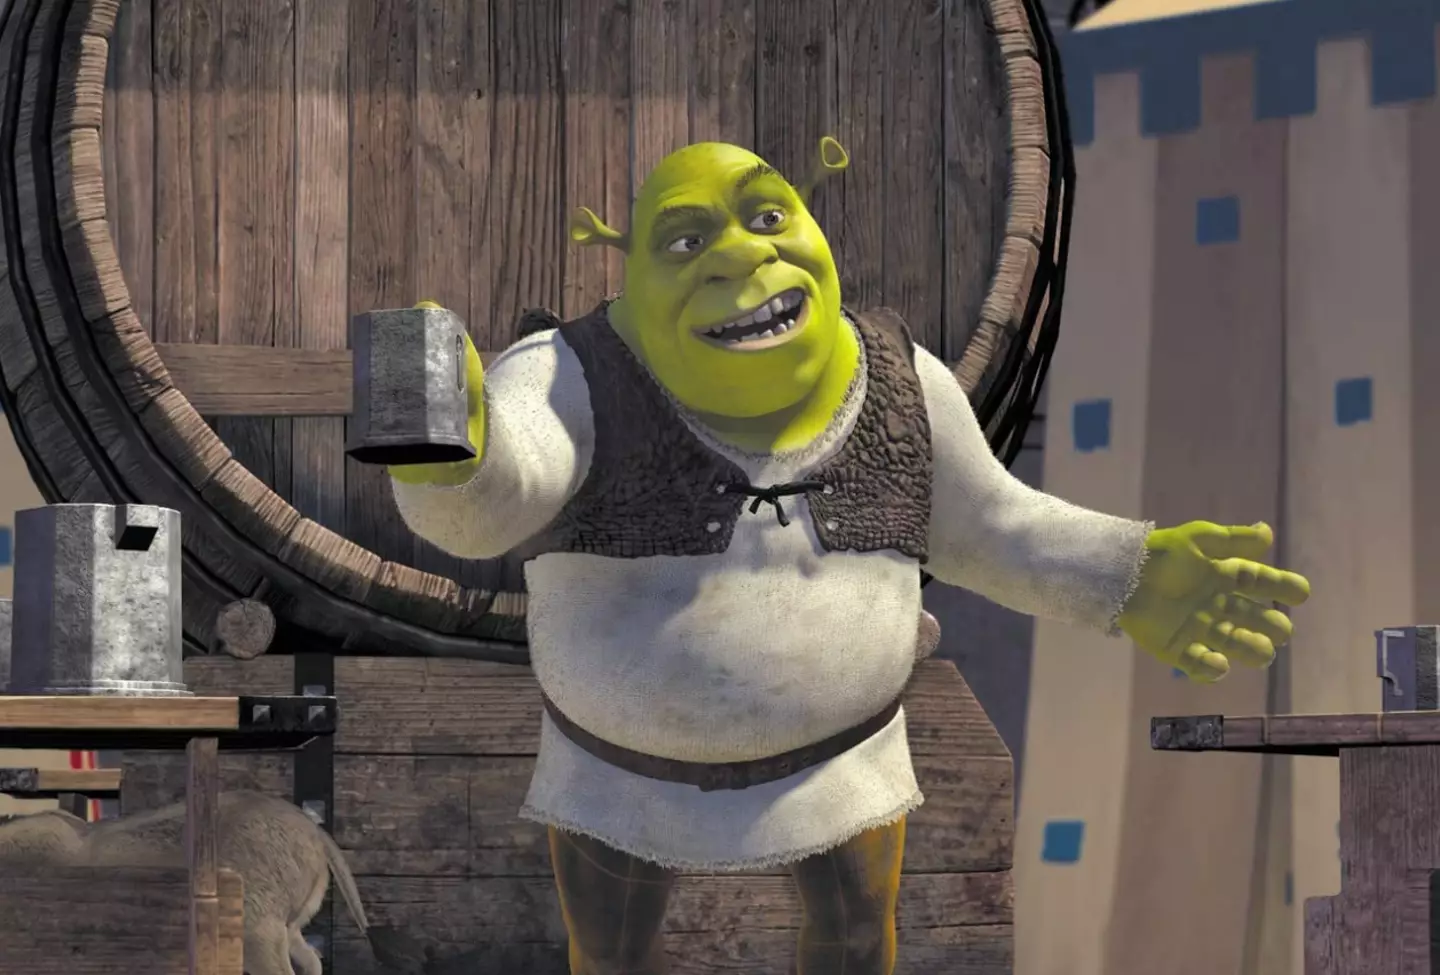 Shrek just wouldn't be the same without Mike Myers.